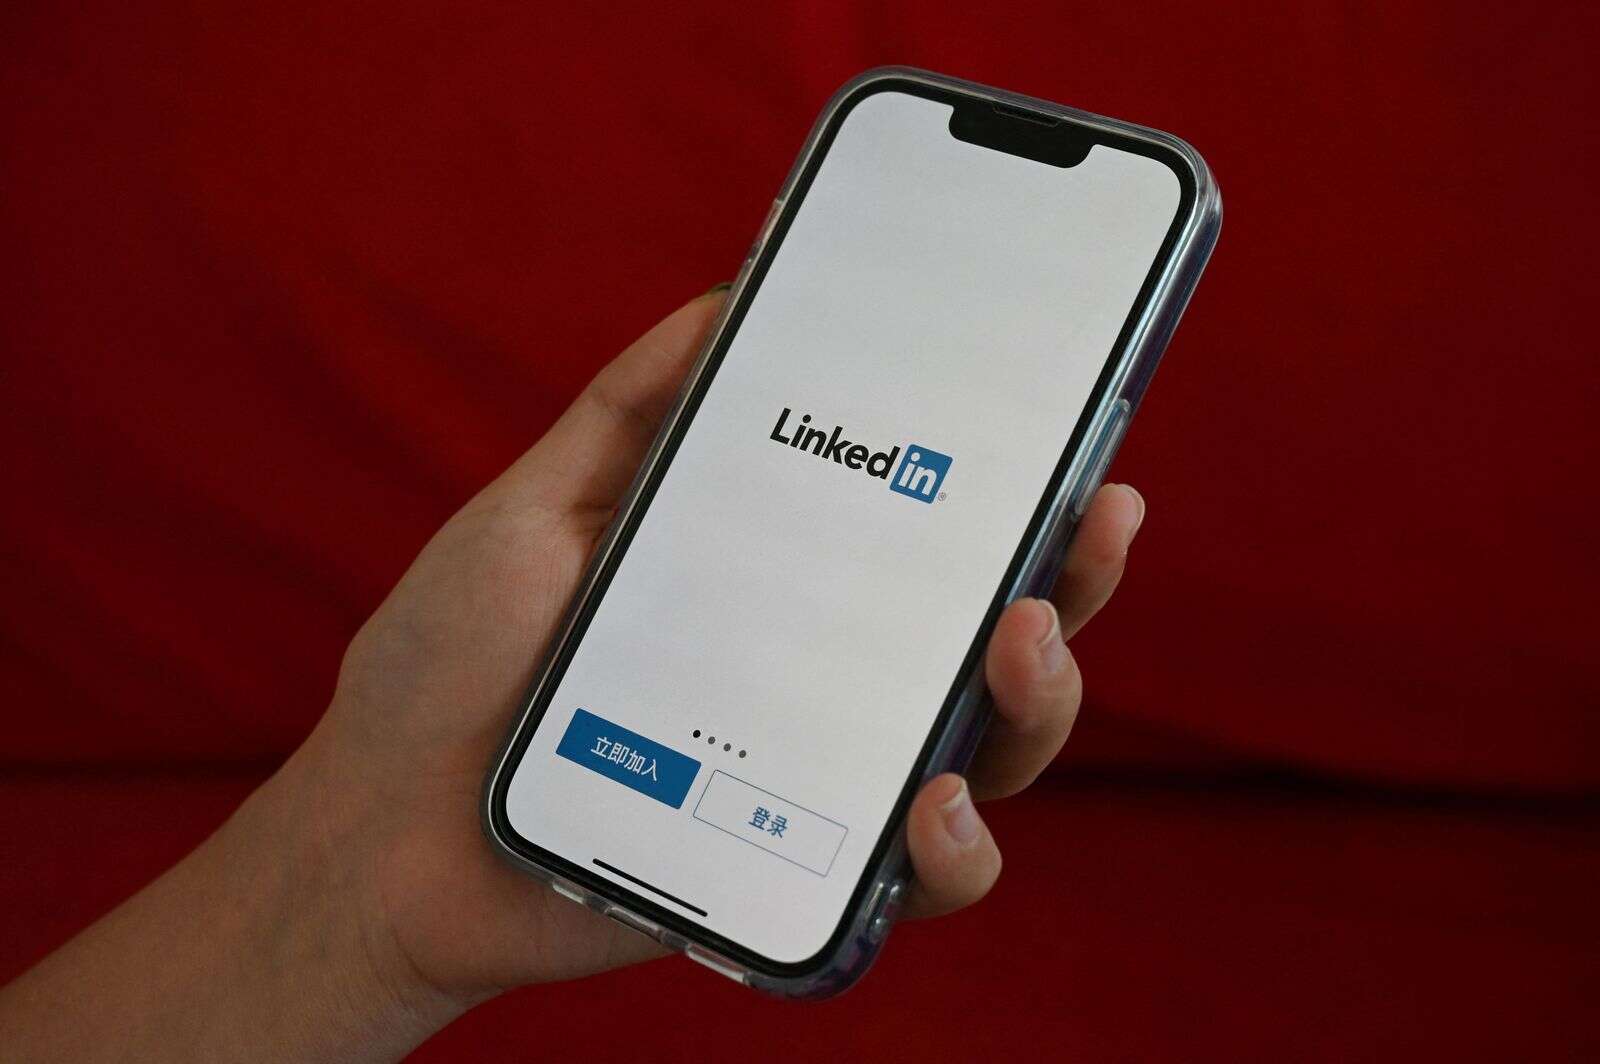 dubai: is linkedin the new tinder? women call out 'creepy' men using work platform as dating site